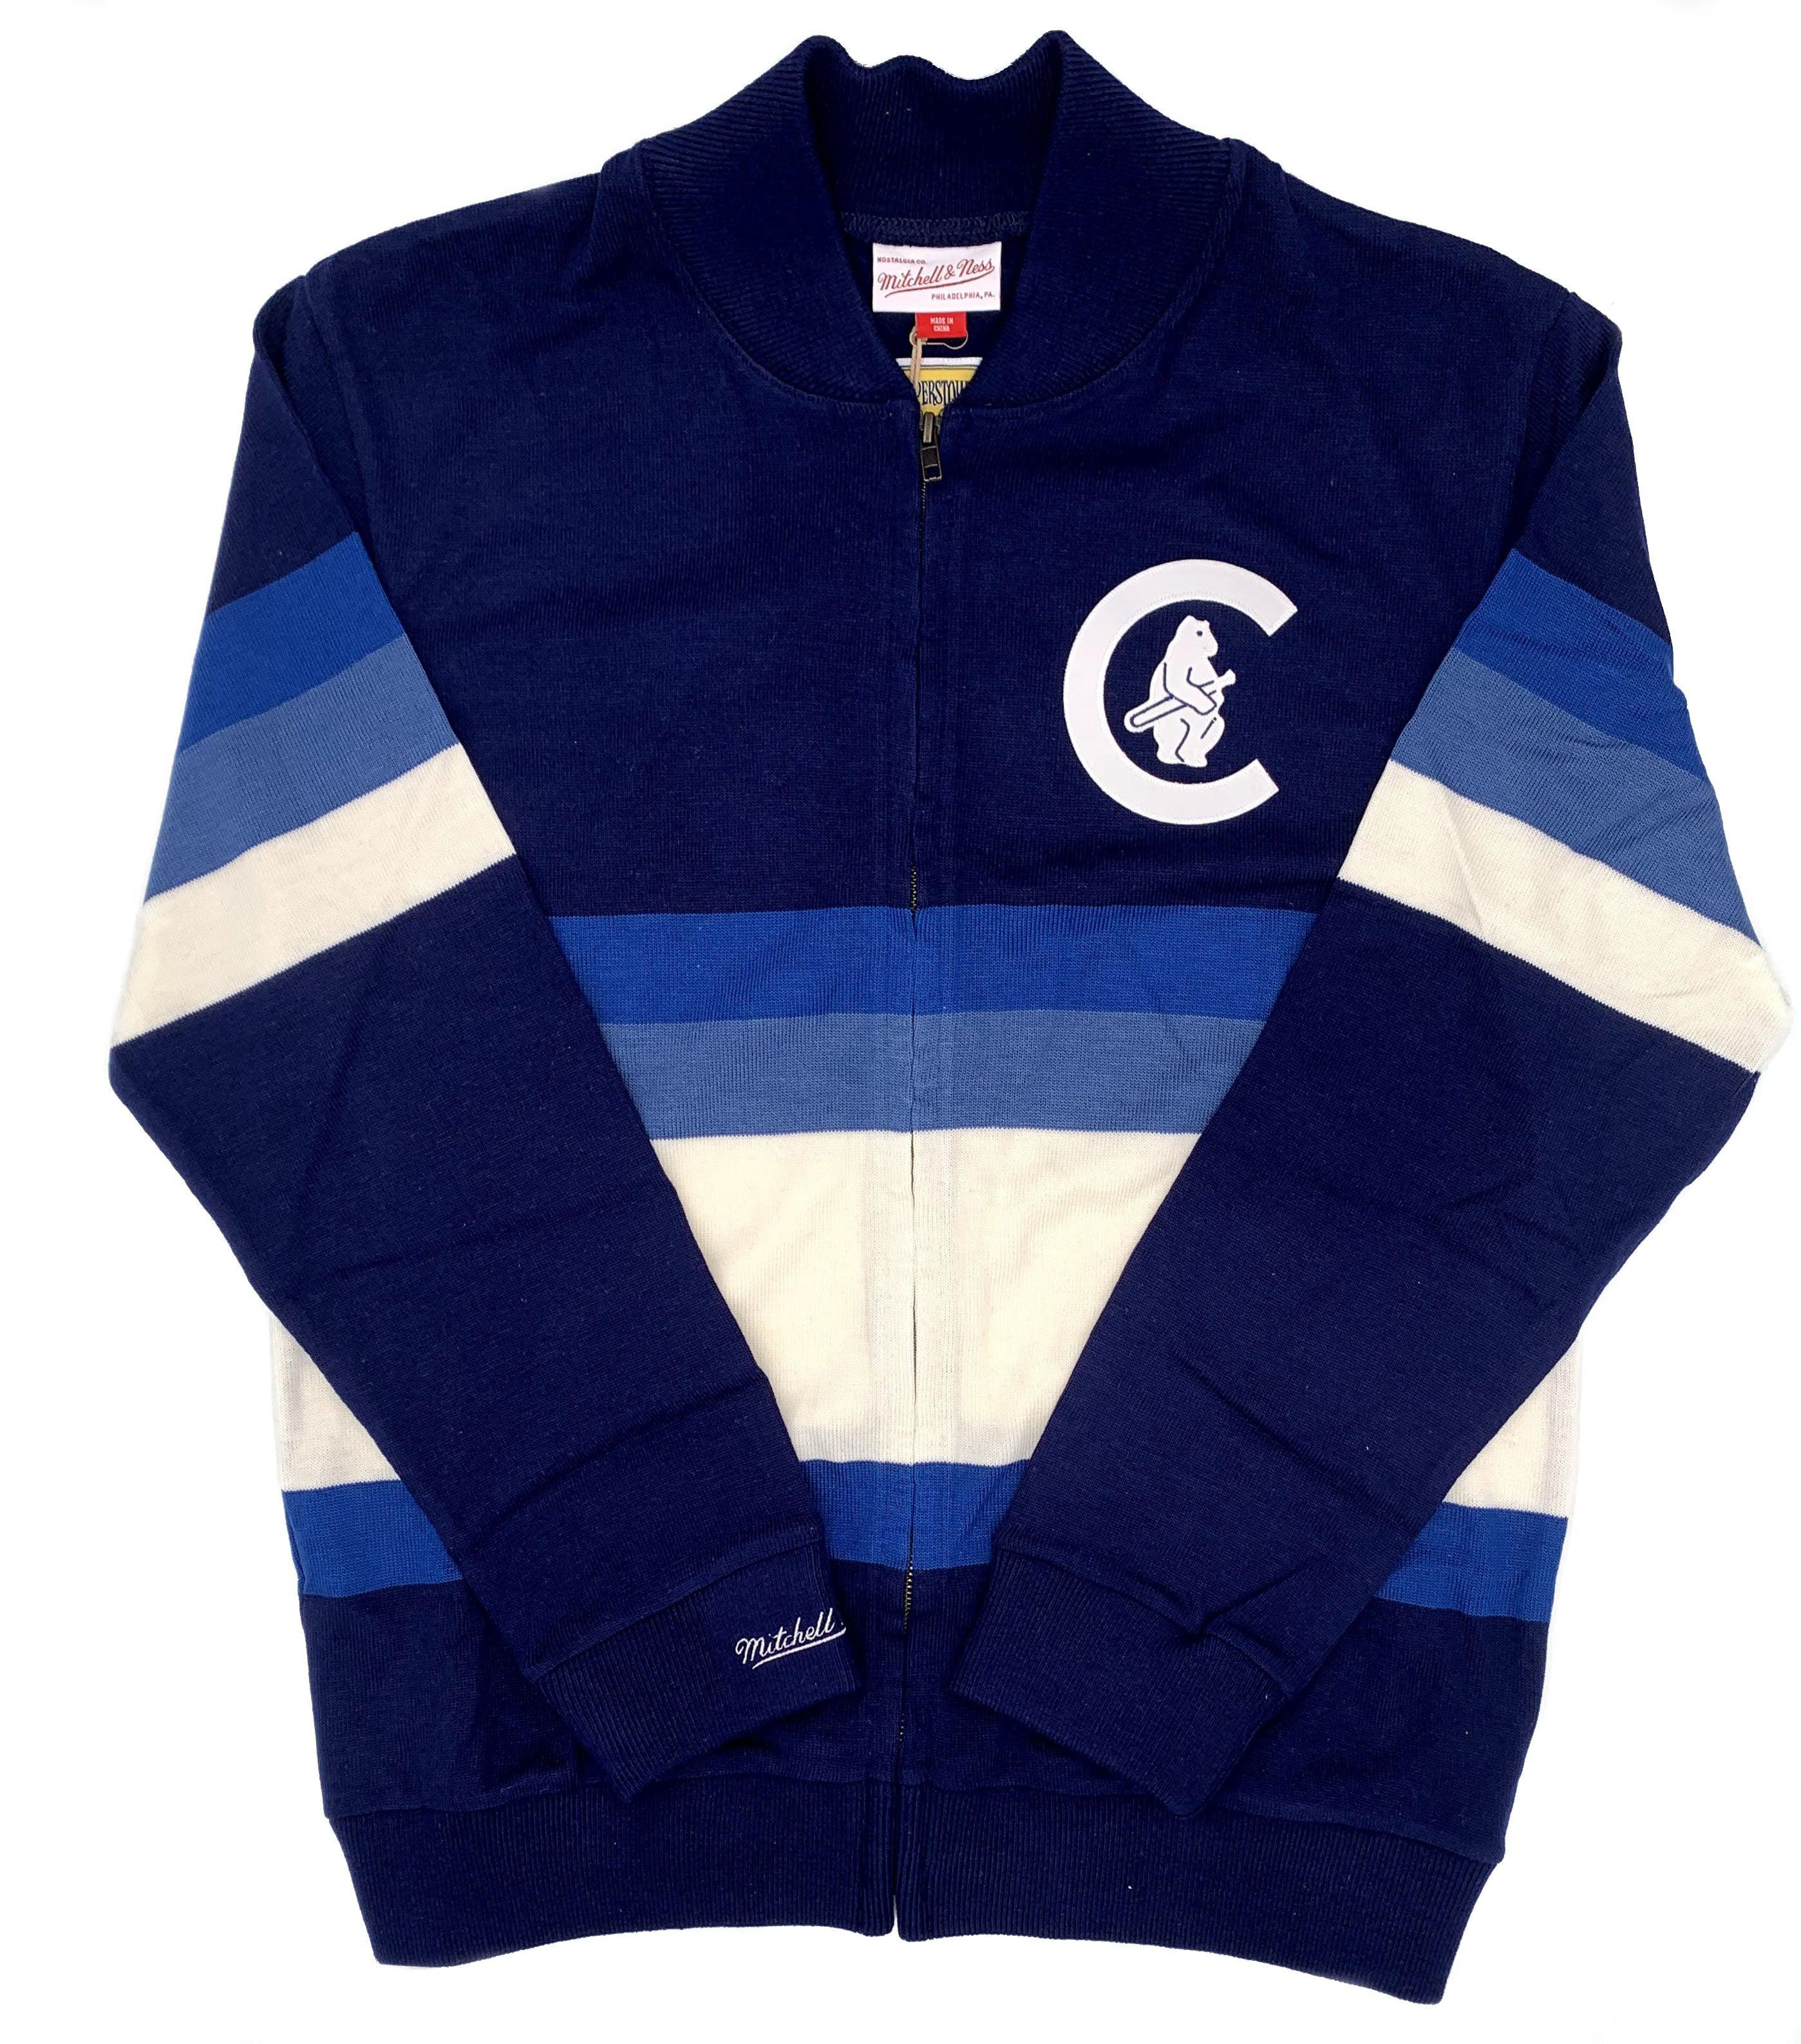 mitchell and ness cubs hoodie